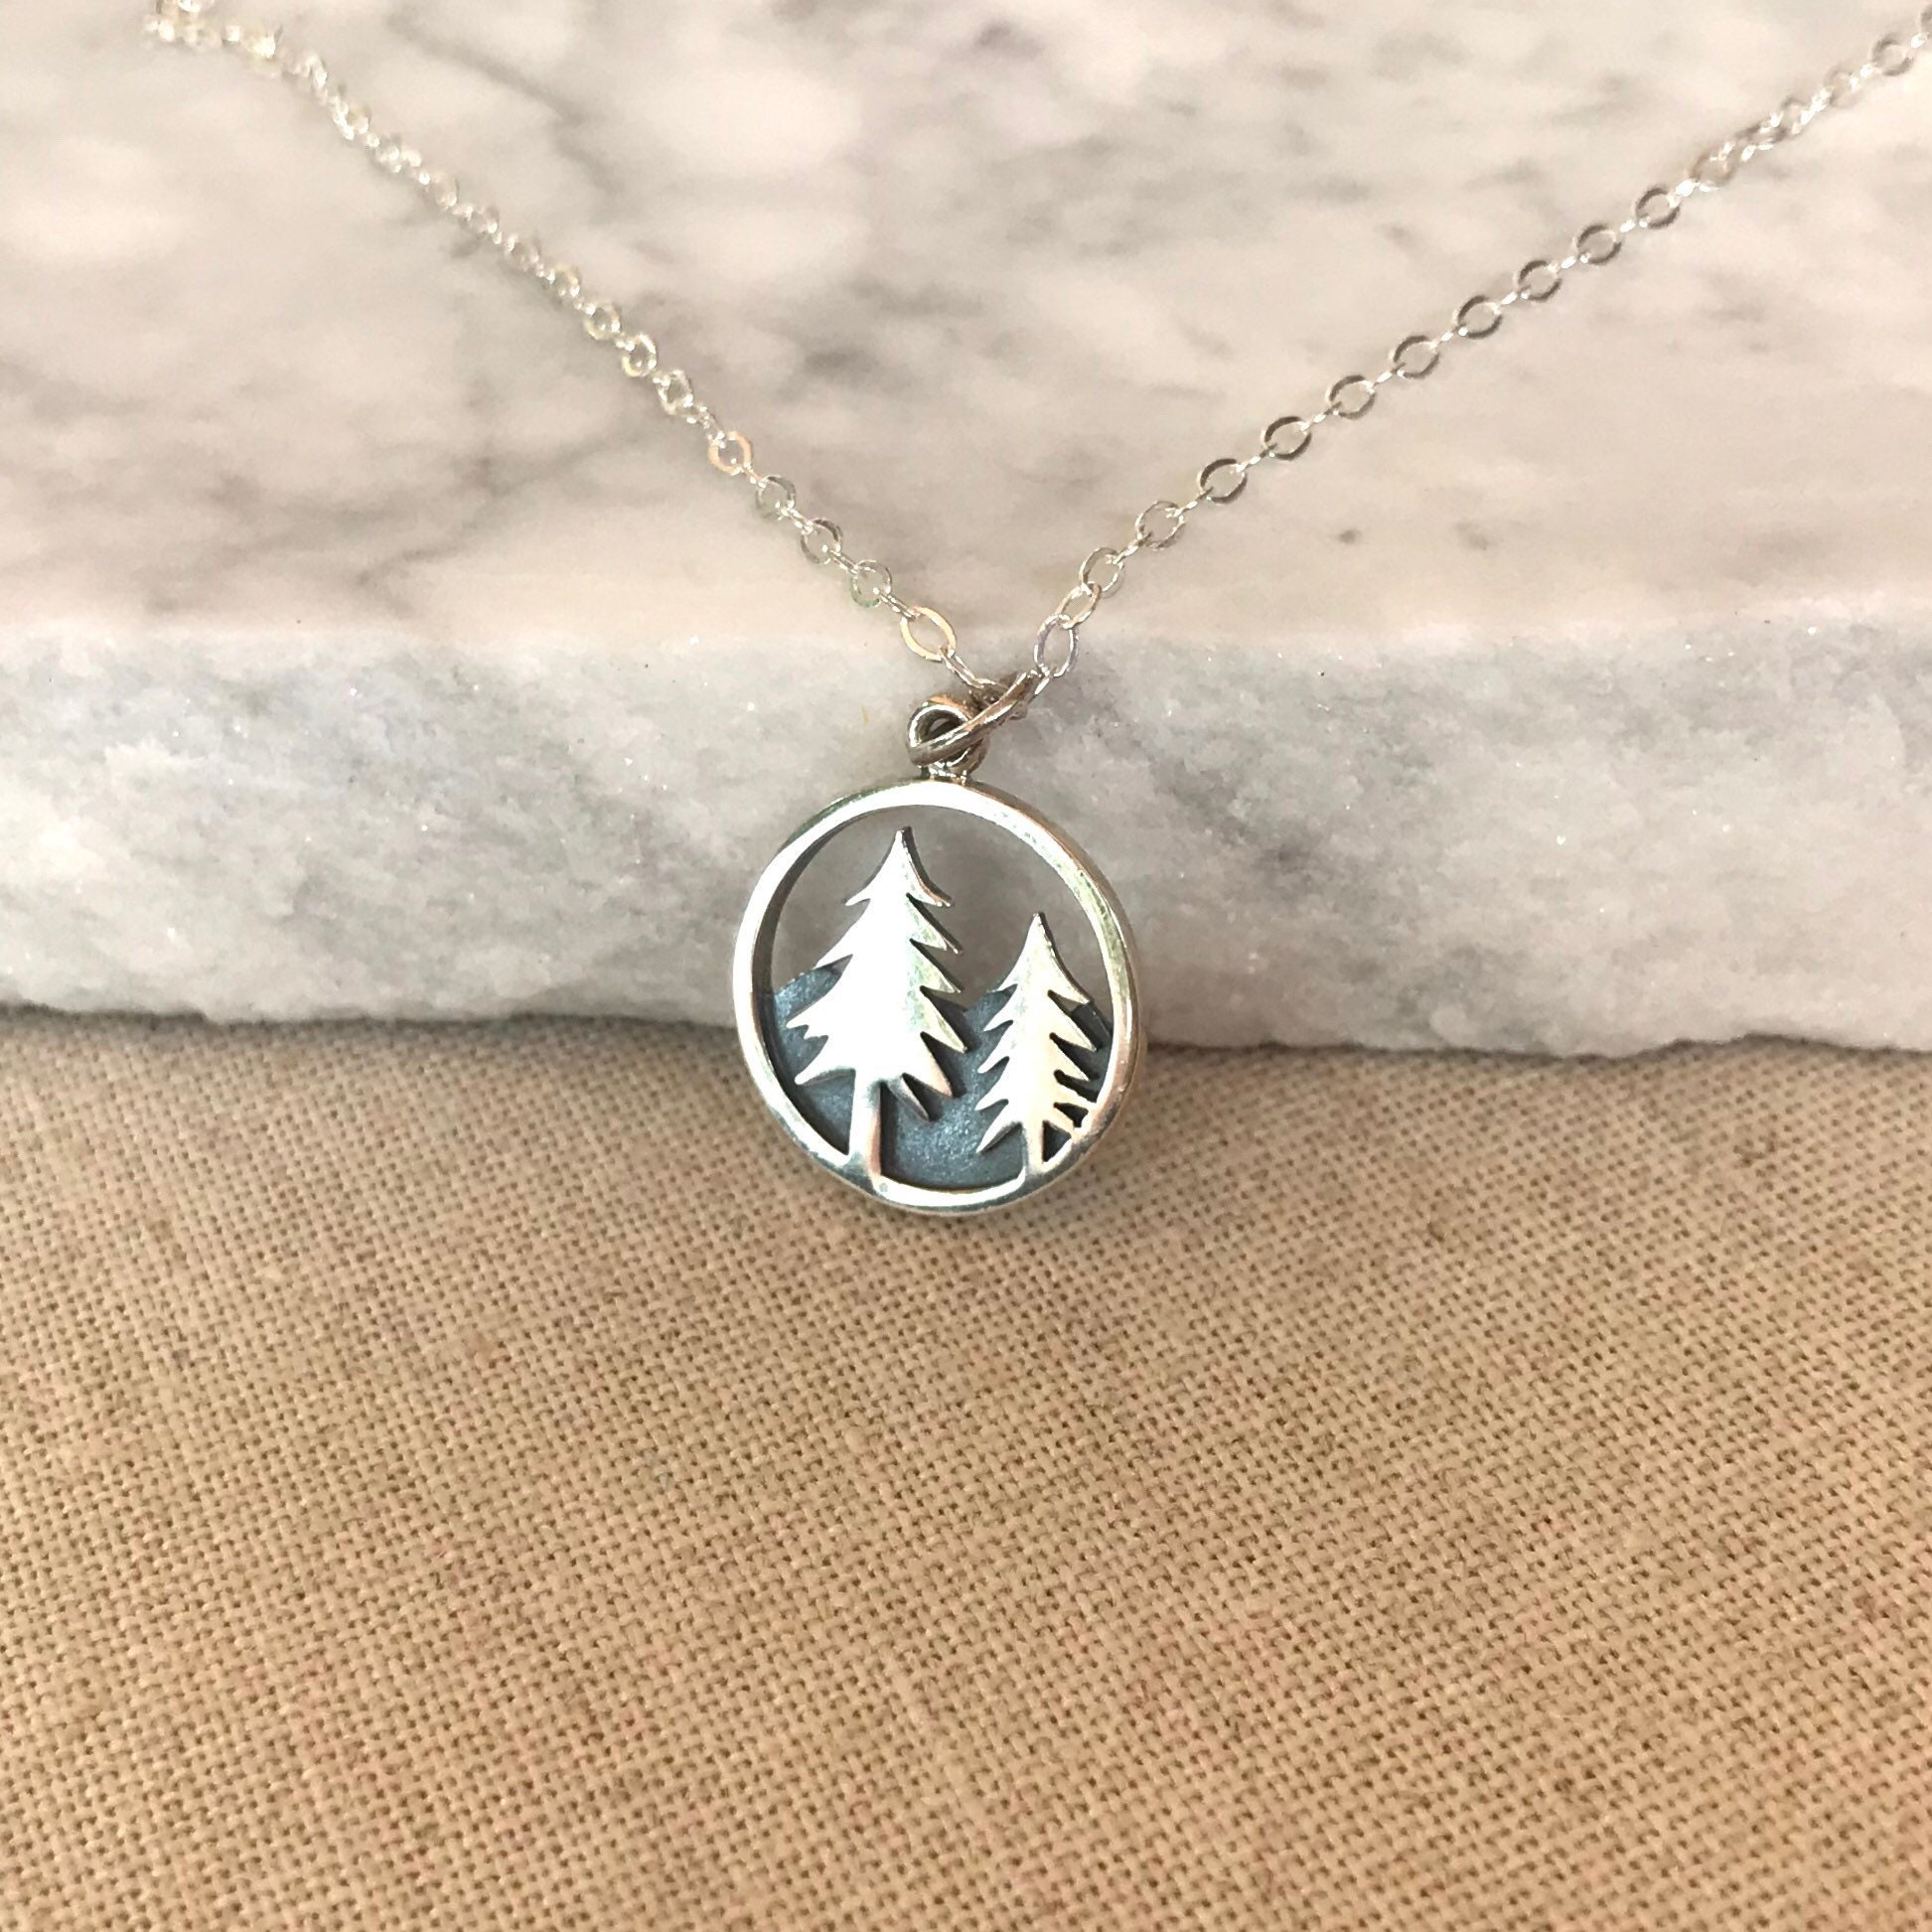 Pine Trees and Mountains Necklace Bright and Oxidized | Etsy